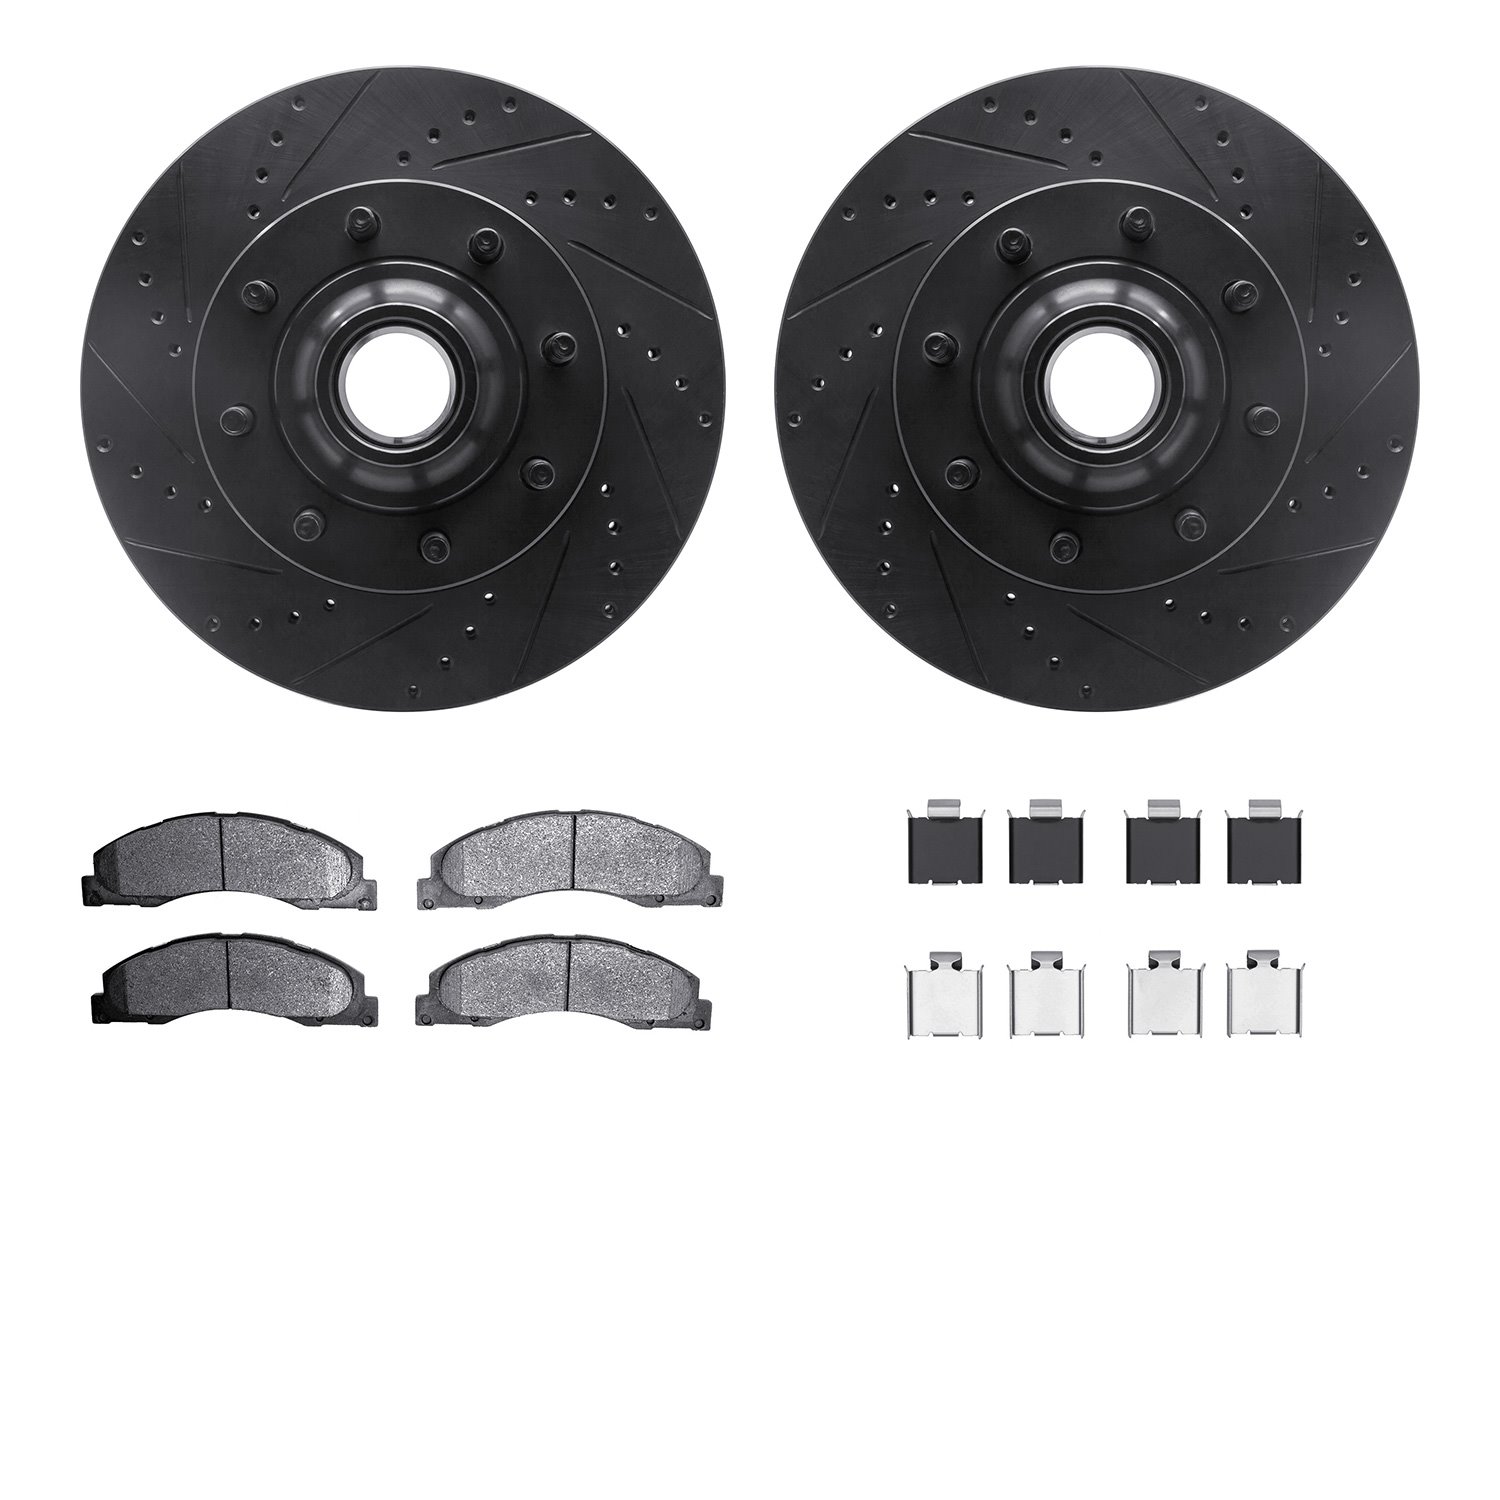 8212-99220 Drilled/Slotted Rotors w/Heavy-Duty Brake Pads Kit & Hardware [Black], Fits Select Ford/Lincoln/Mercury/Mazda, Positi